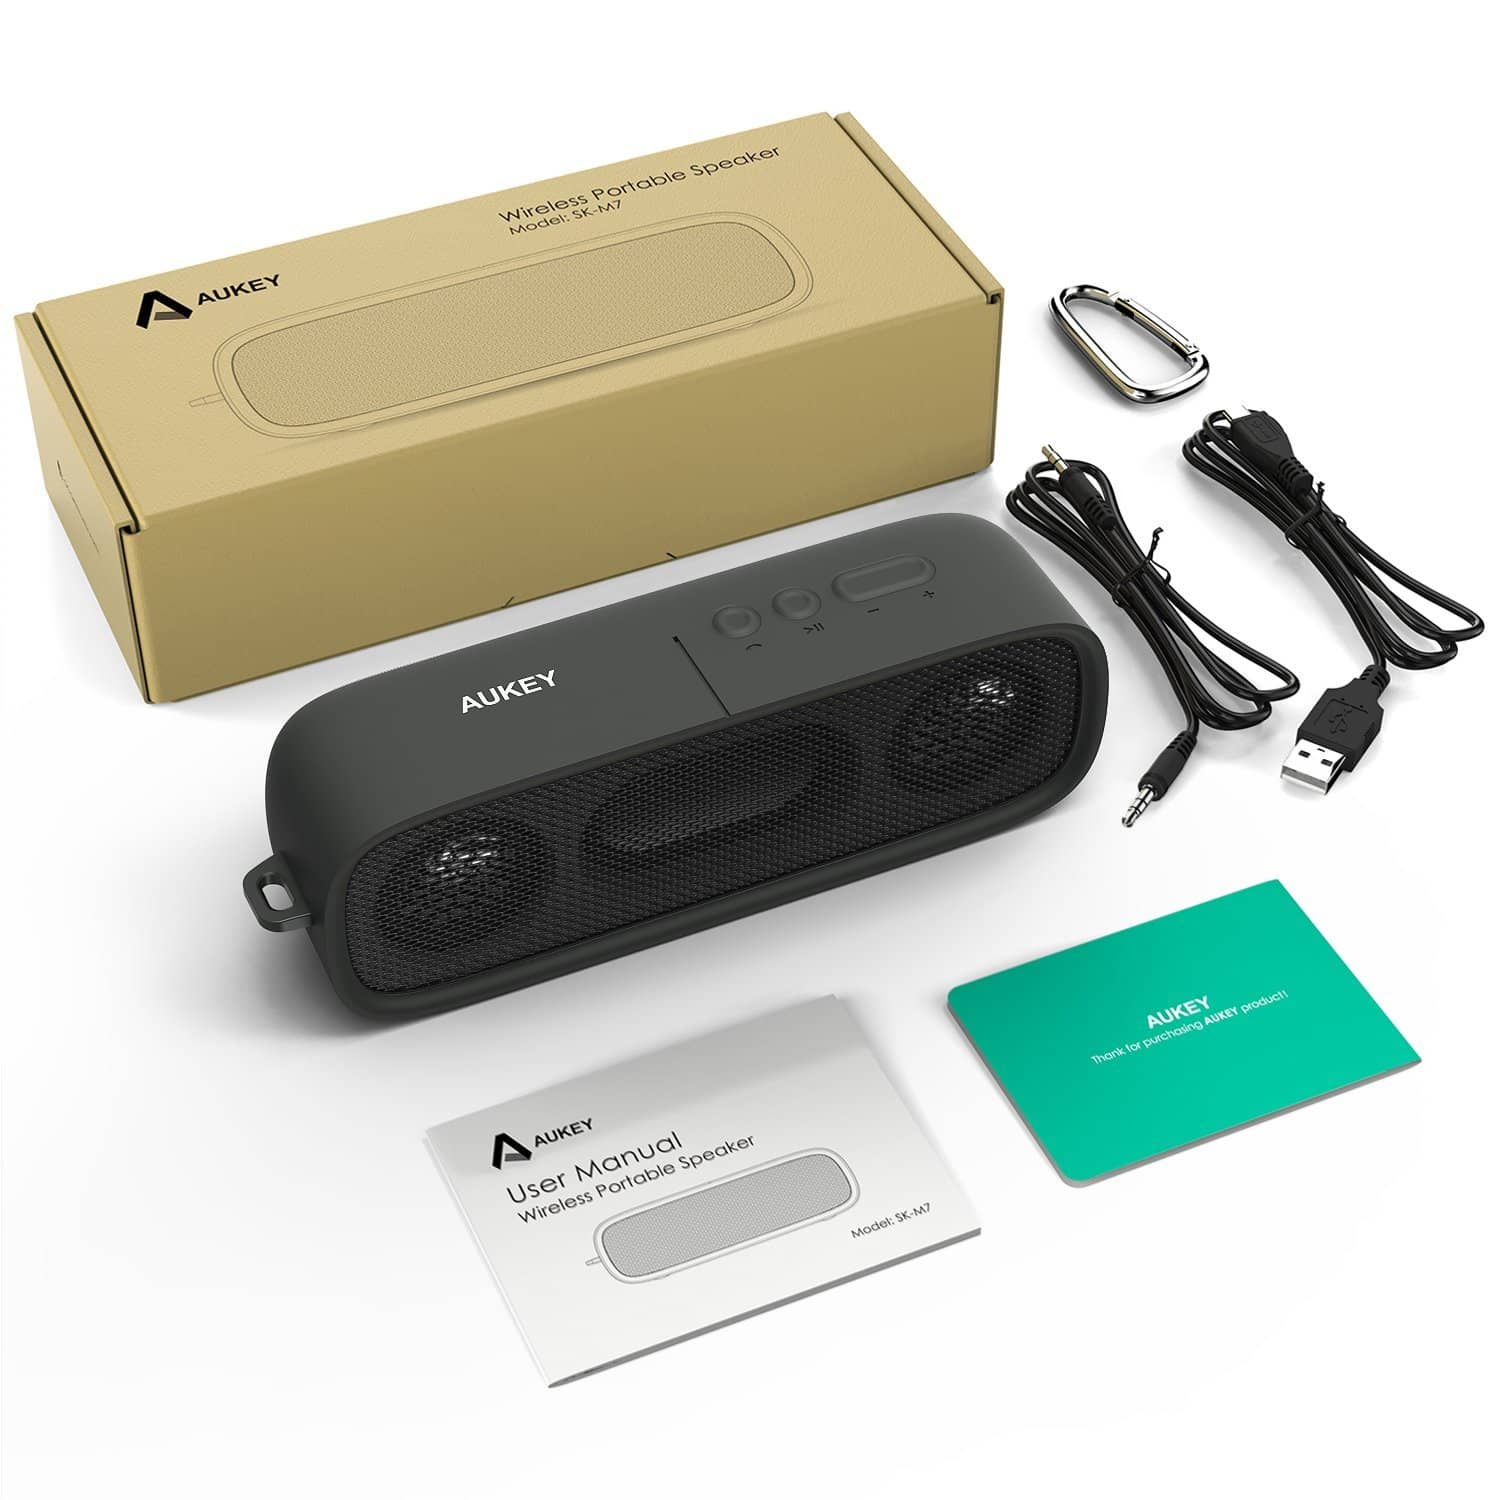 AUKEY SK-M7 Wireless Portable Bluetooth 4.1 outdoor Stereo Speaker - Black - Aukey Malaysia Official Store